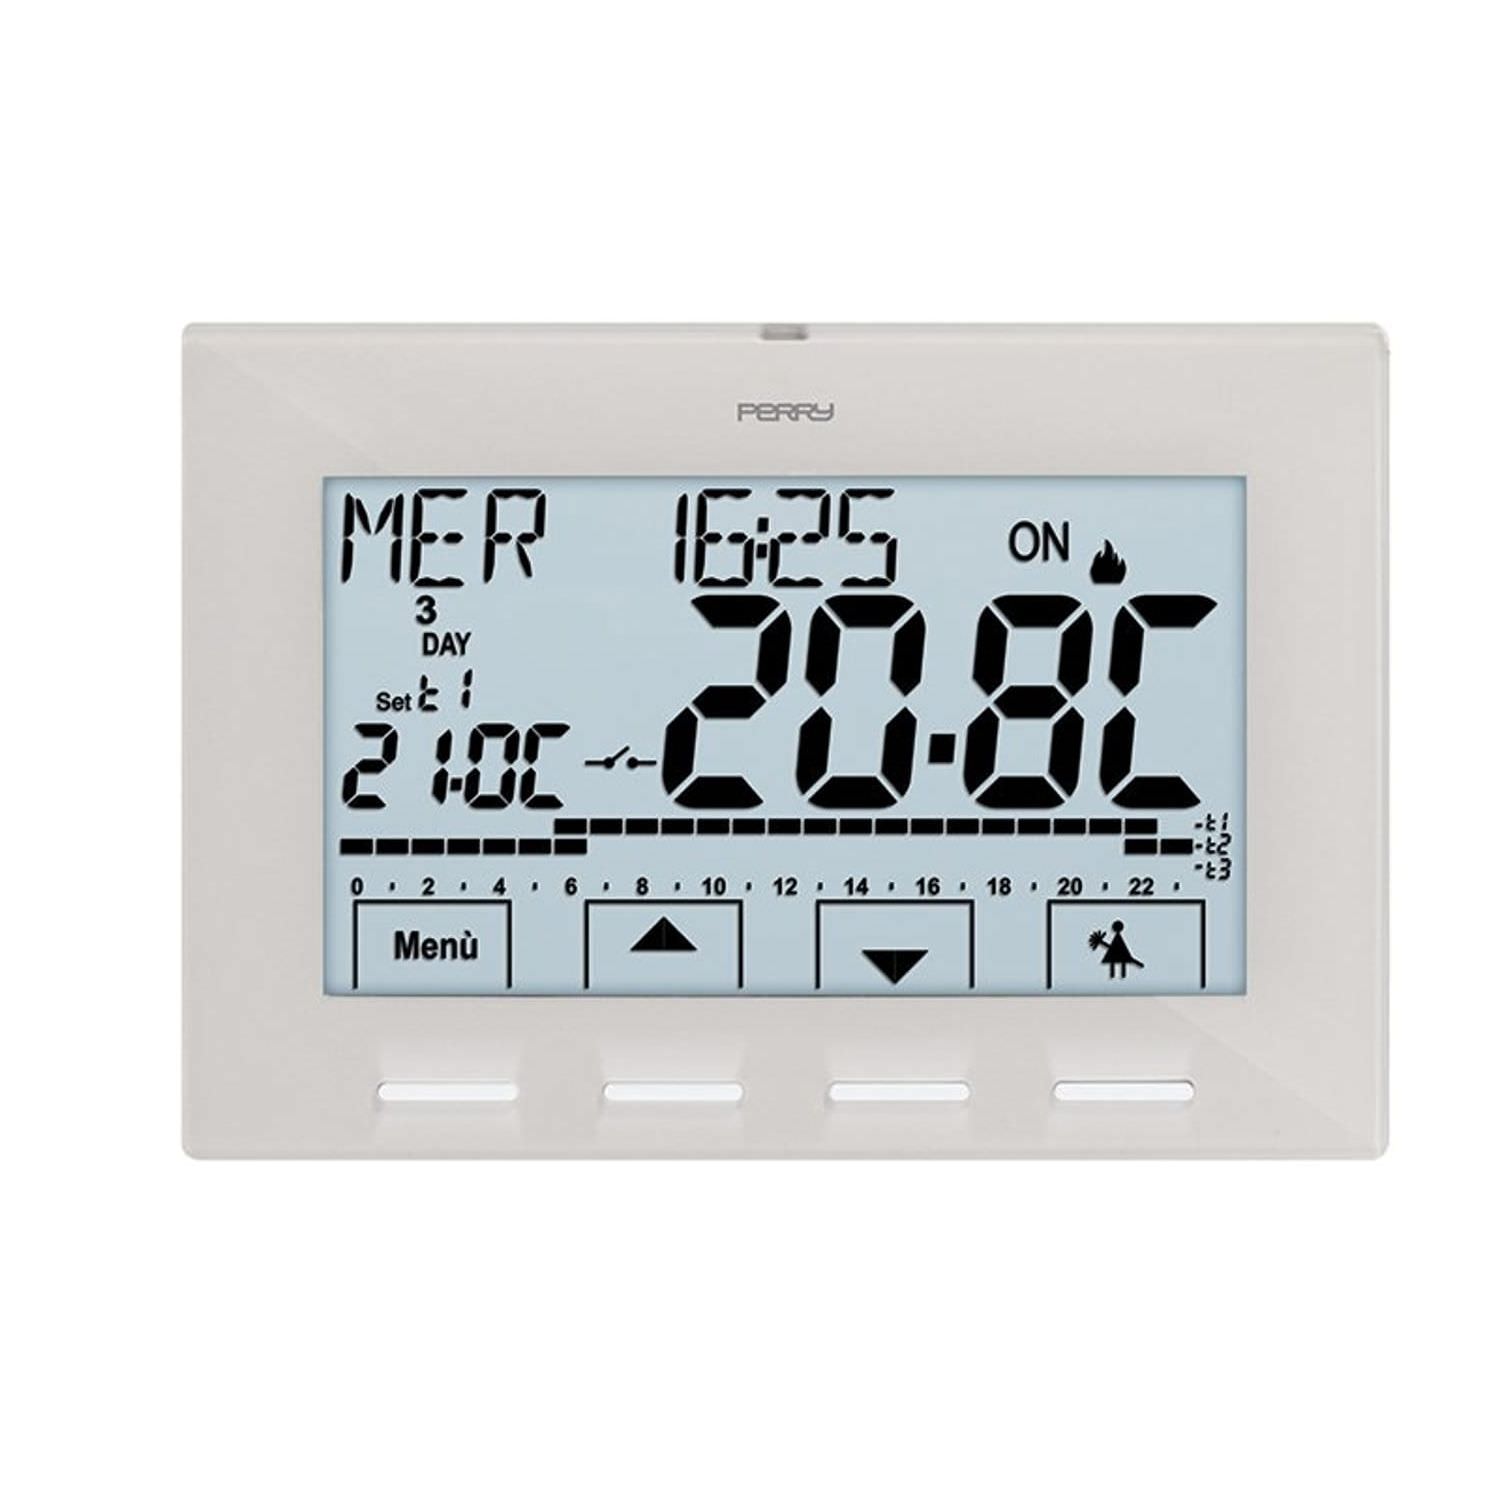 Perry White Wall Clock Thermostat